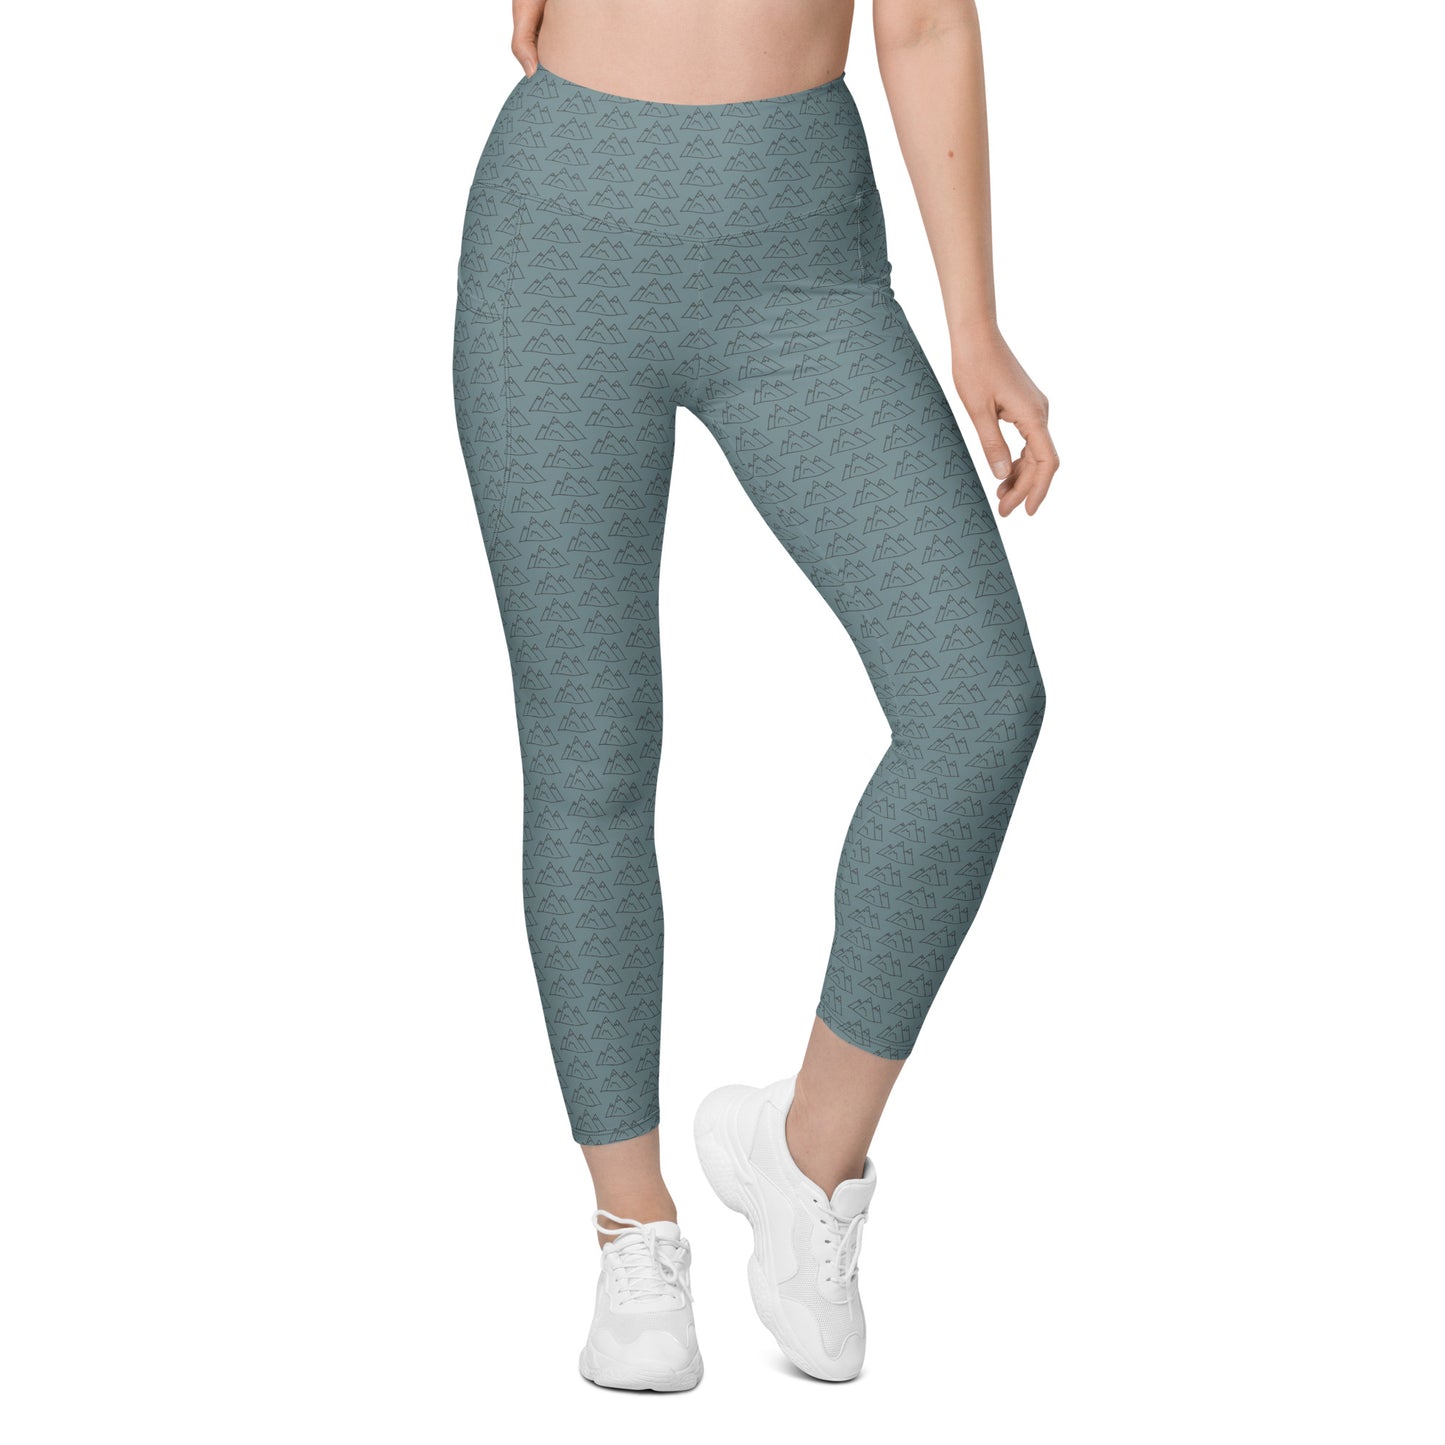 Blue Mountain Leggings with pockets